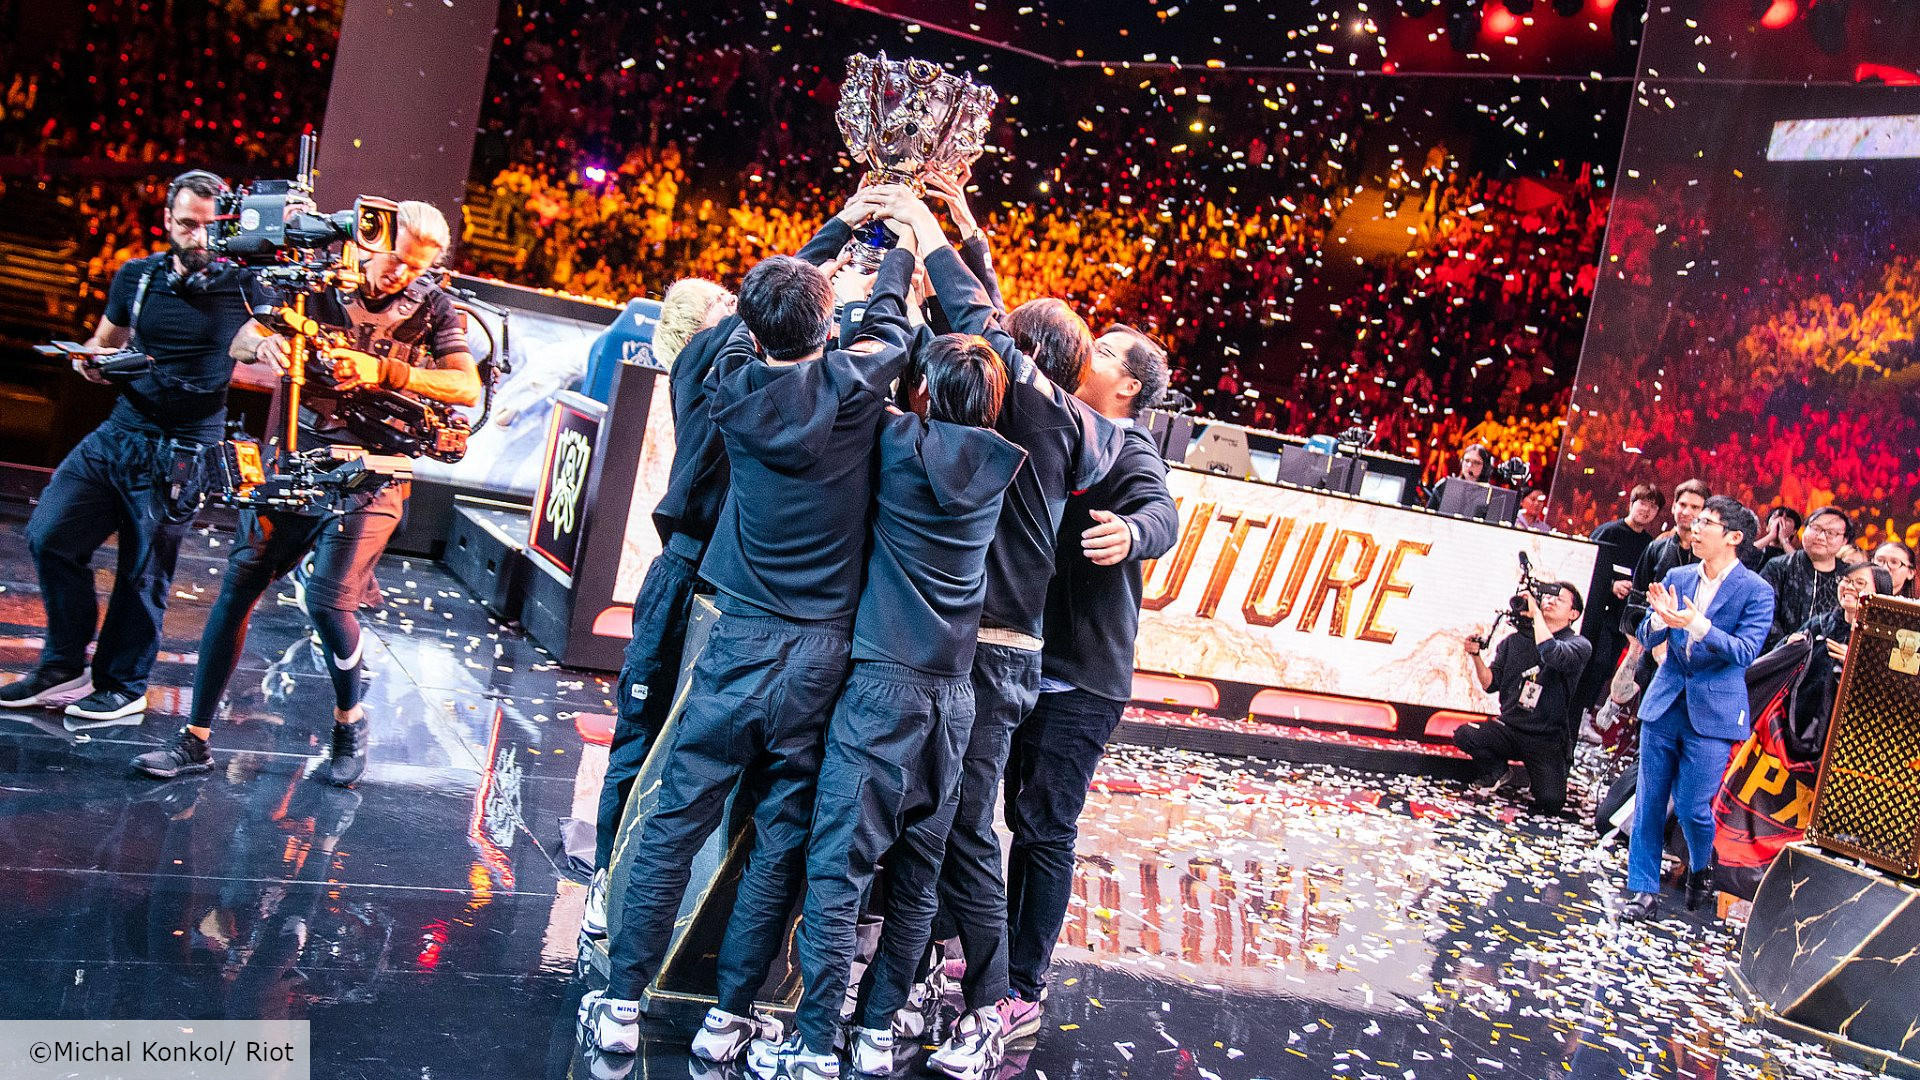 The League of Legends Worlds 2019 song is Phoenix, and it's out now